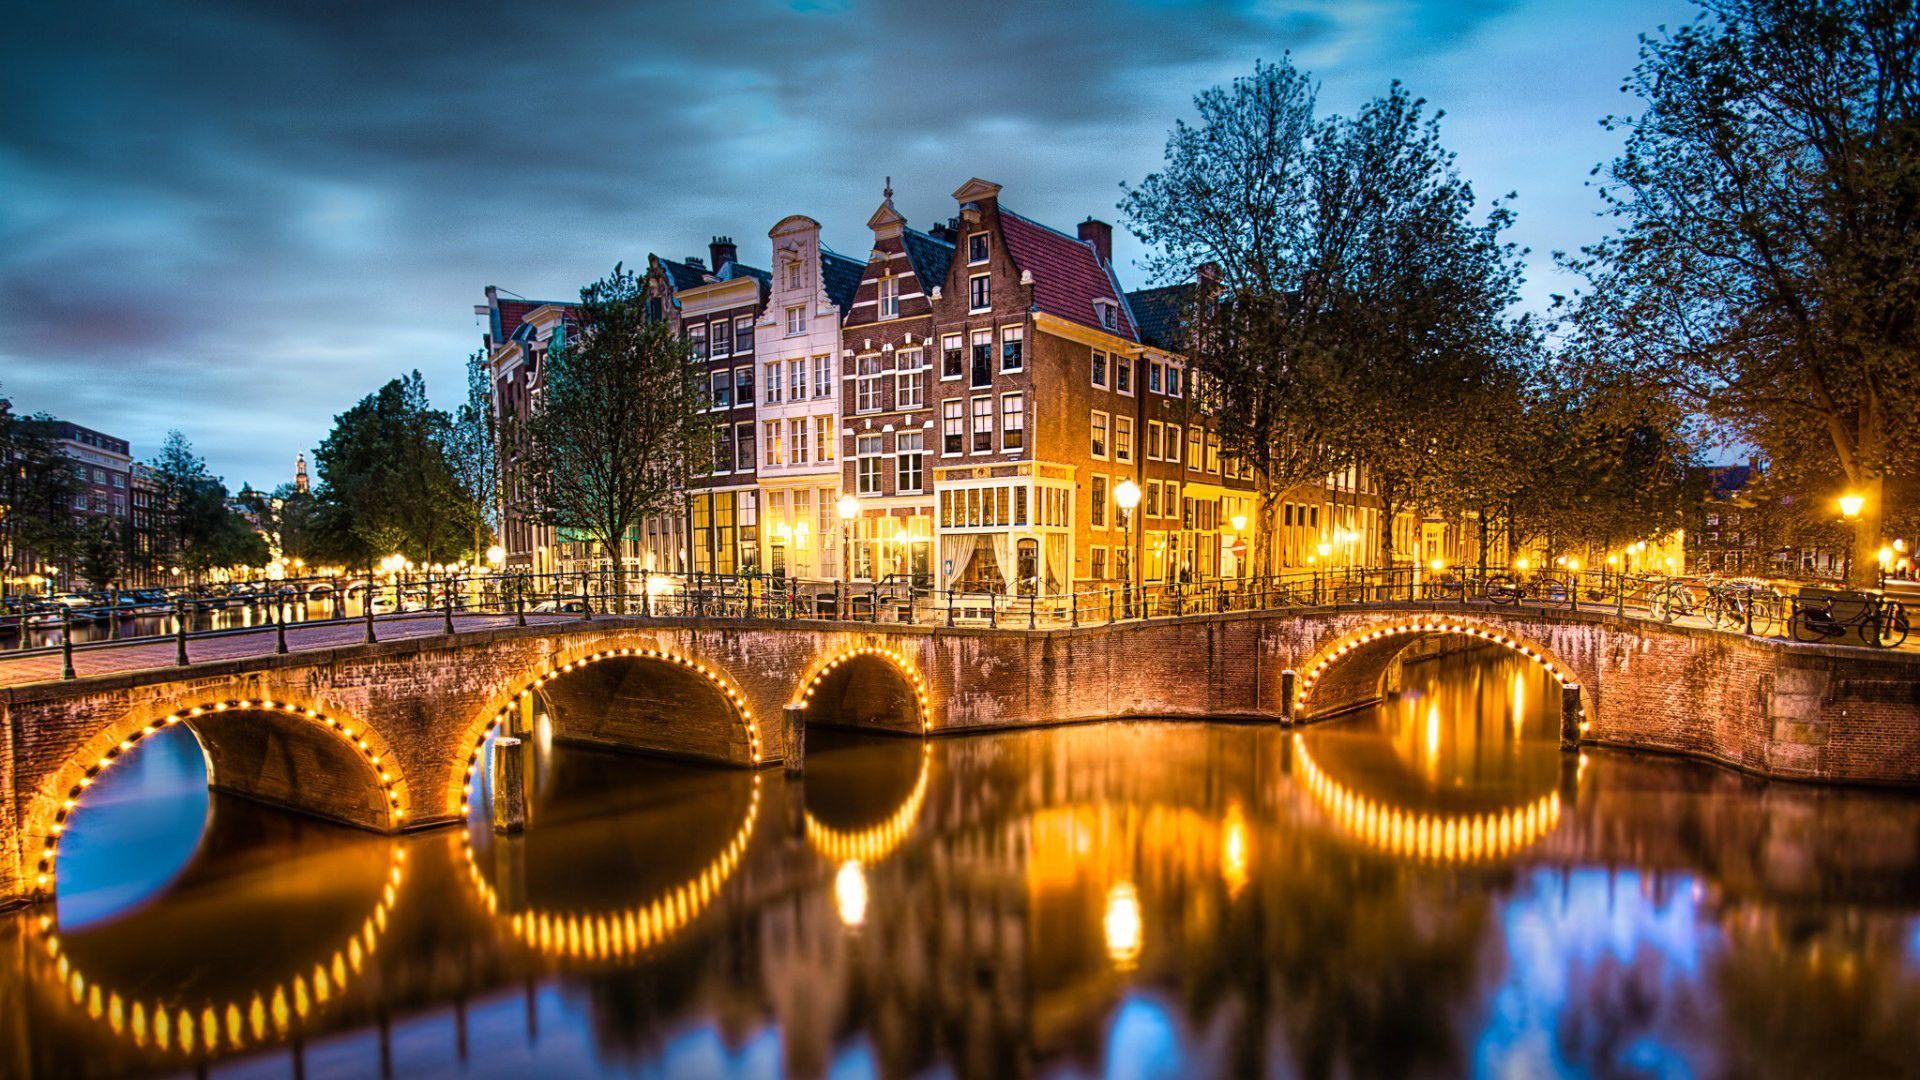 15 Amsterdam iPhone X Wallpapers To Celebrate The Launch Of My New Travel  Blog  Preppy Wallpapers  Amsterdam wallpaper Amsterdam photography  Travel wallpaper